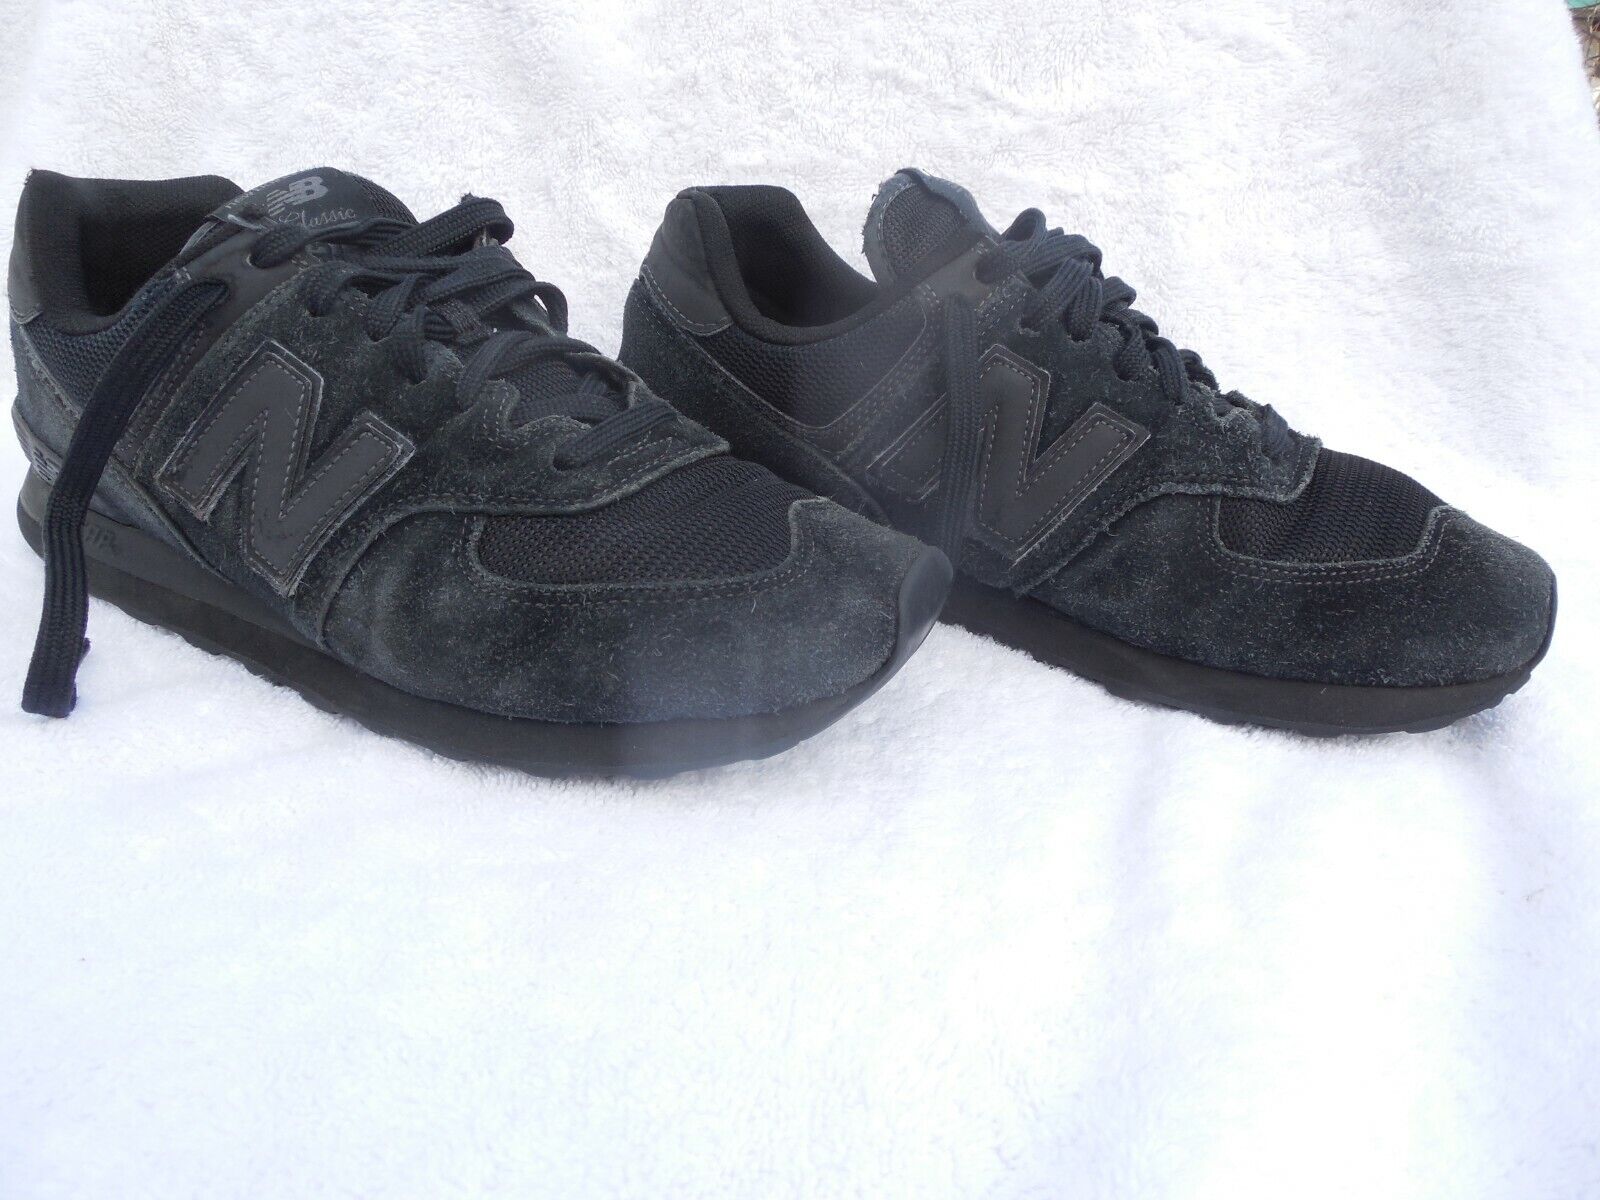 USED BLACK SUEDE NEW BALANCE  CLASSICS 574 SNEAKERS New Balance New Balance 574